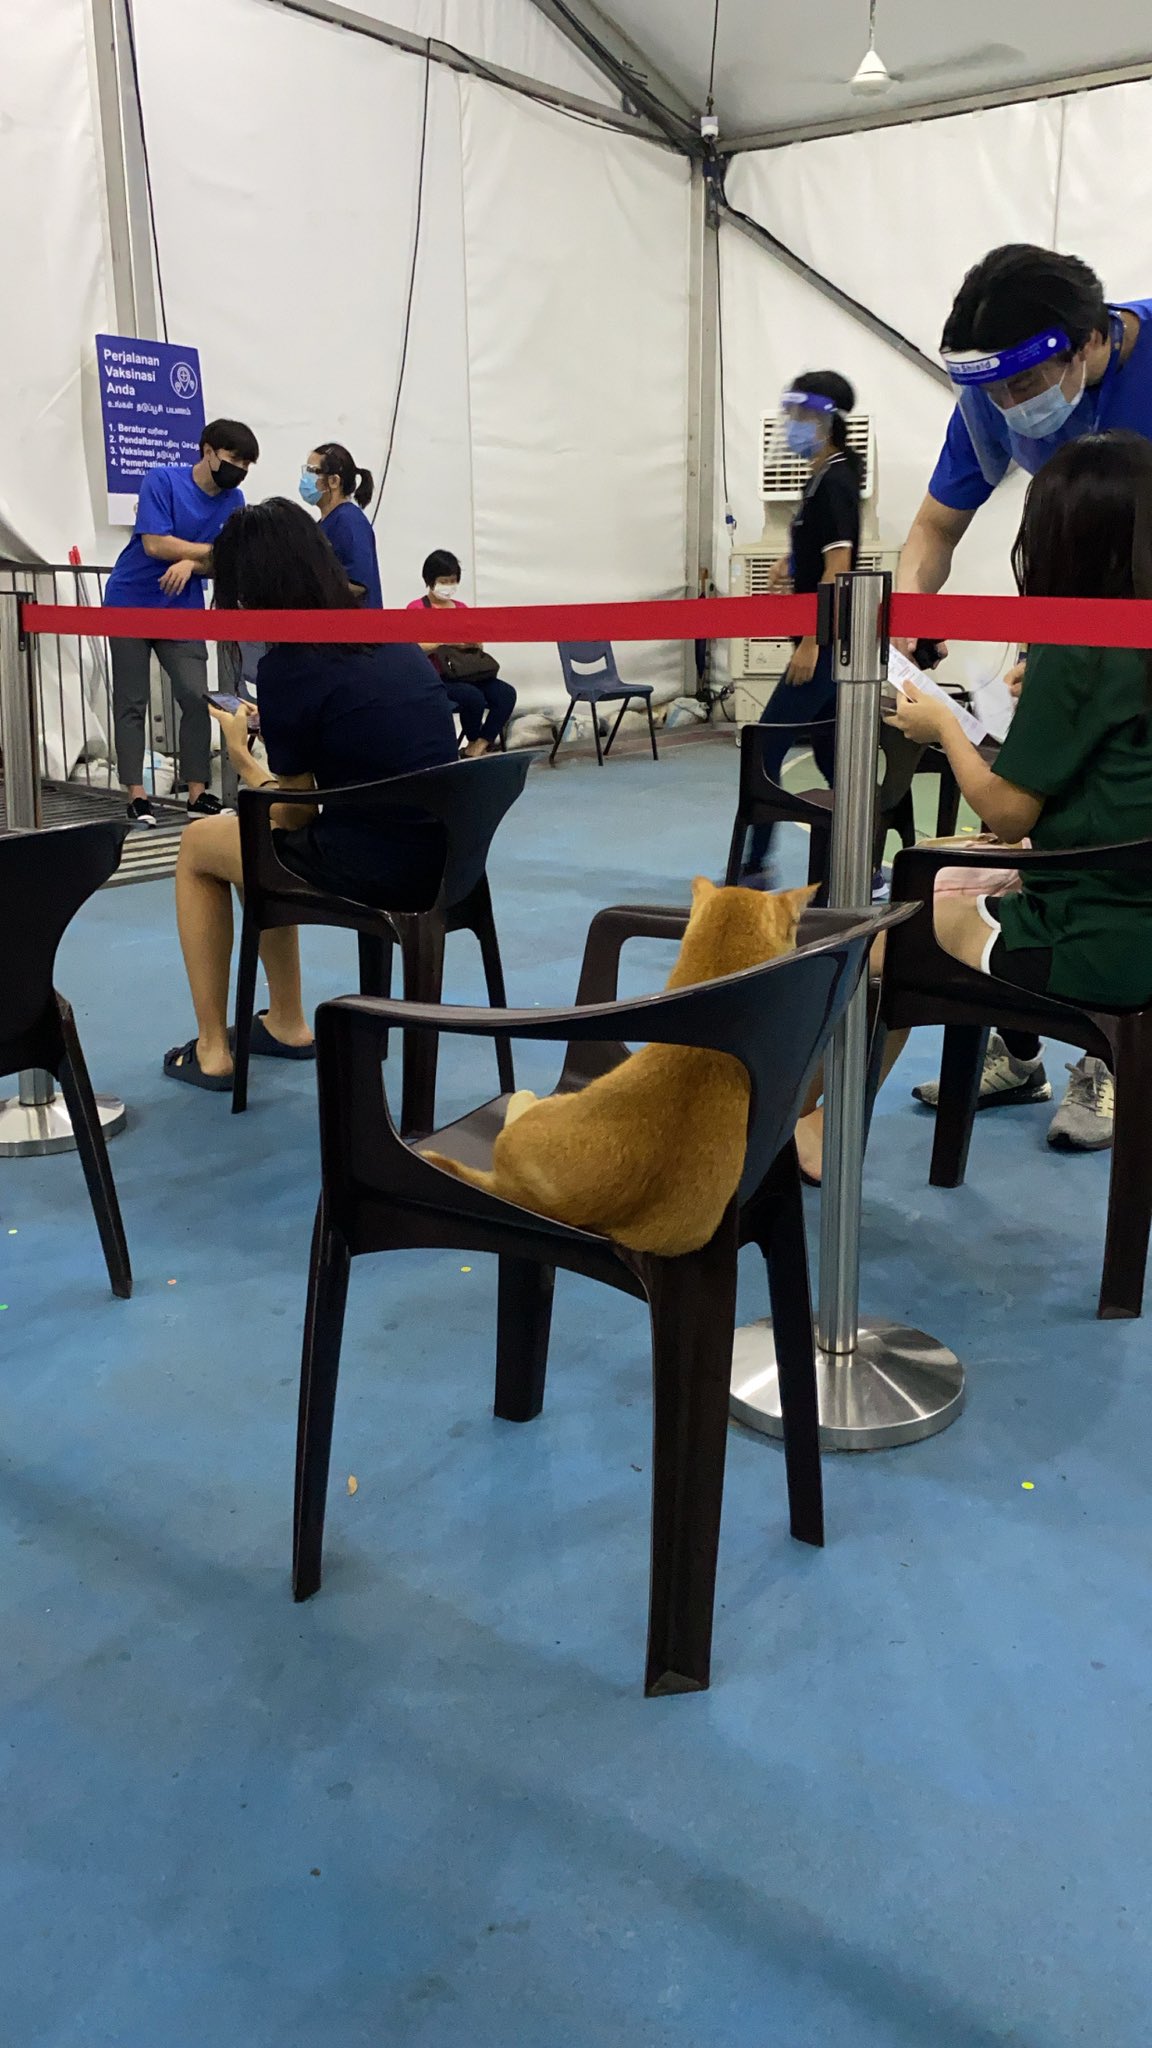 Cat Waits For Vaccination in Singapore